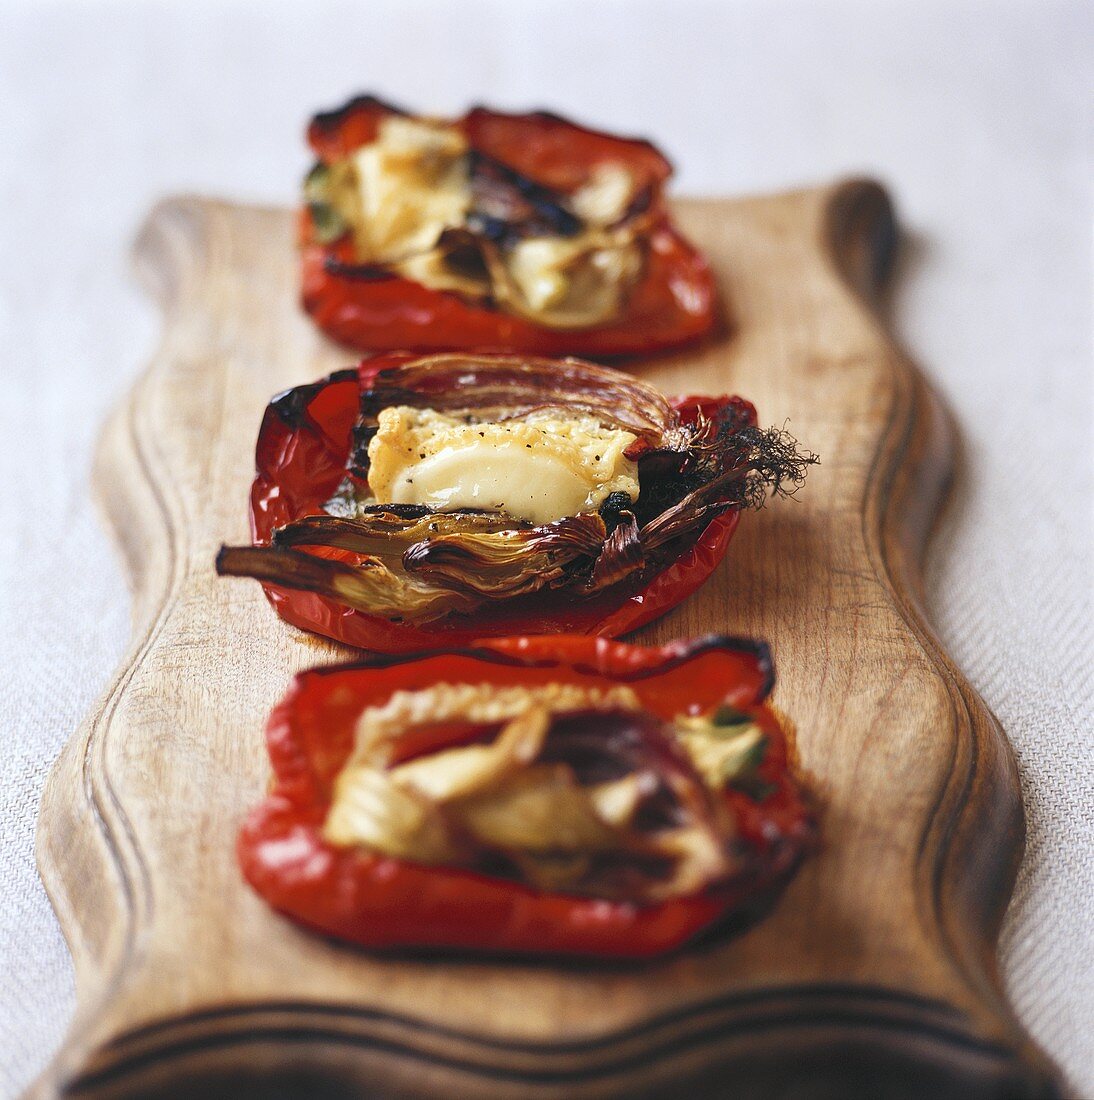 Baked stuffed peppers with goat's cheese stuffing